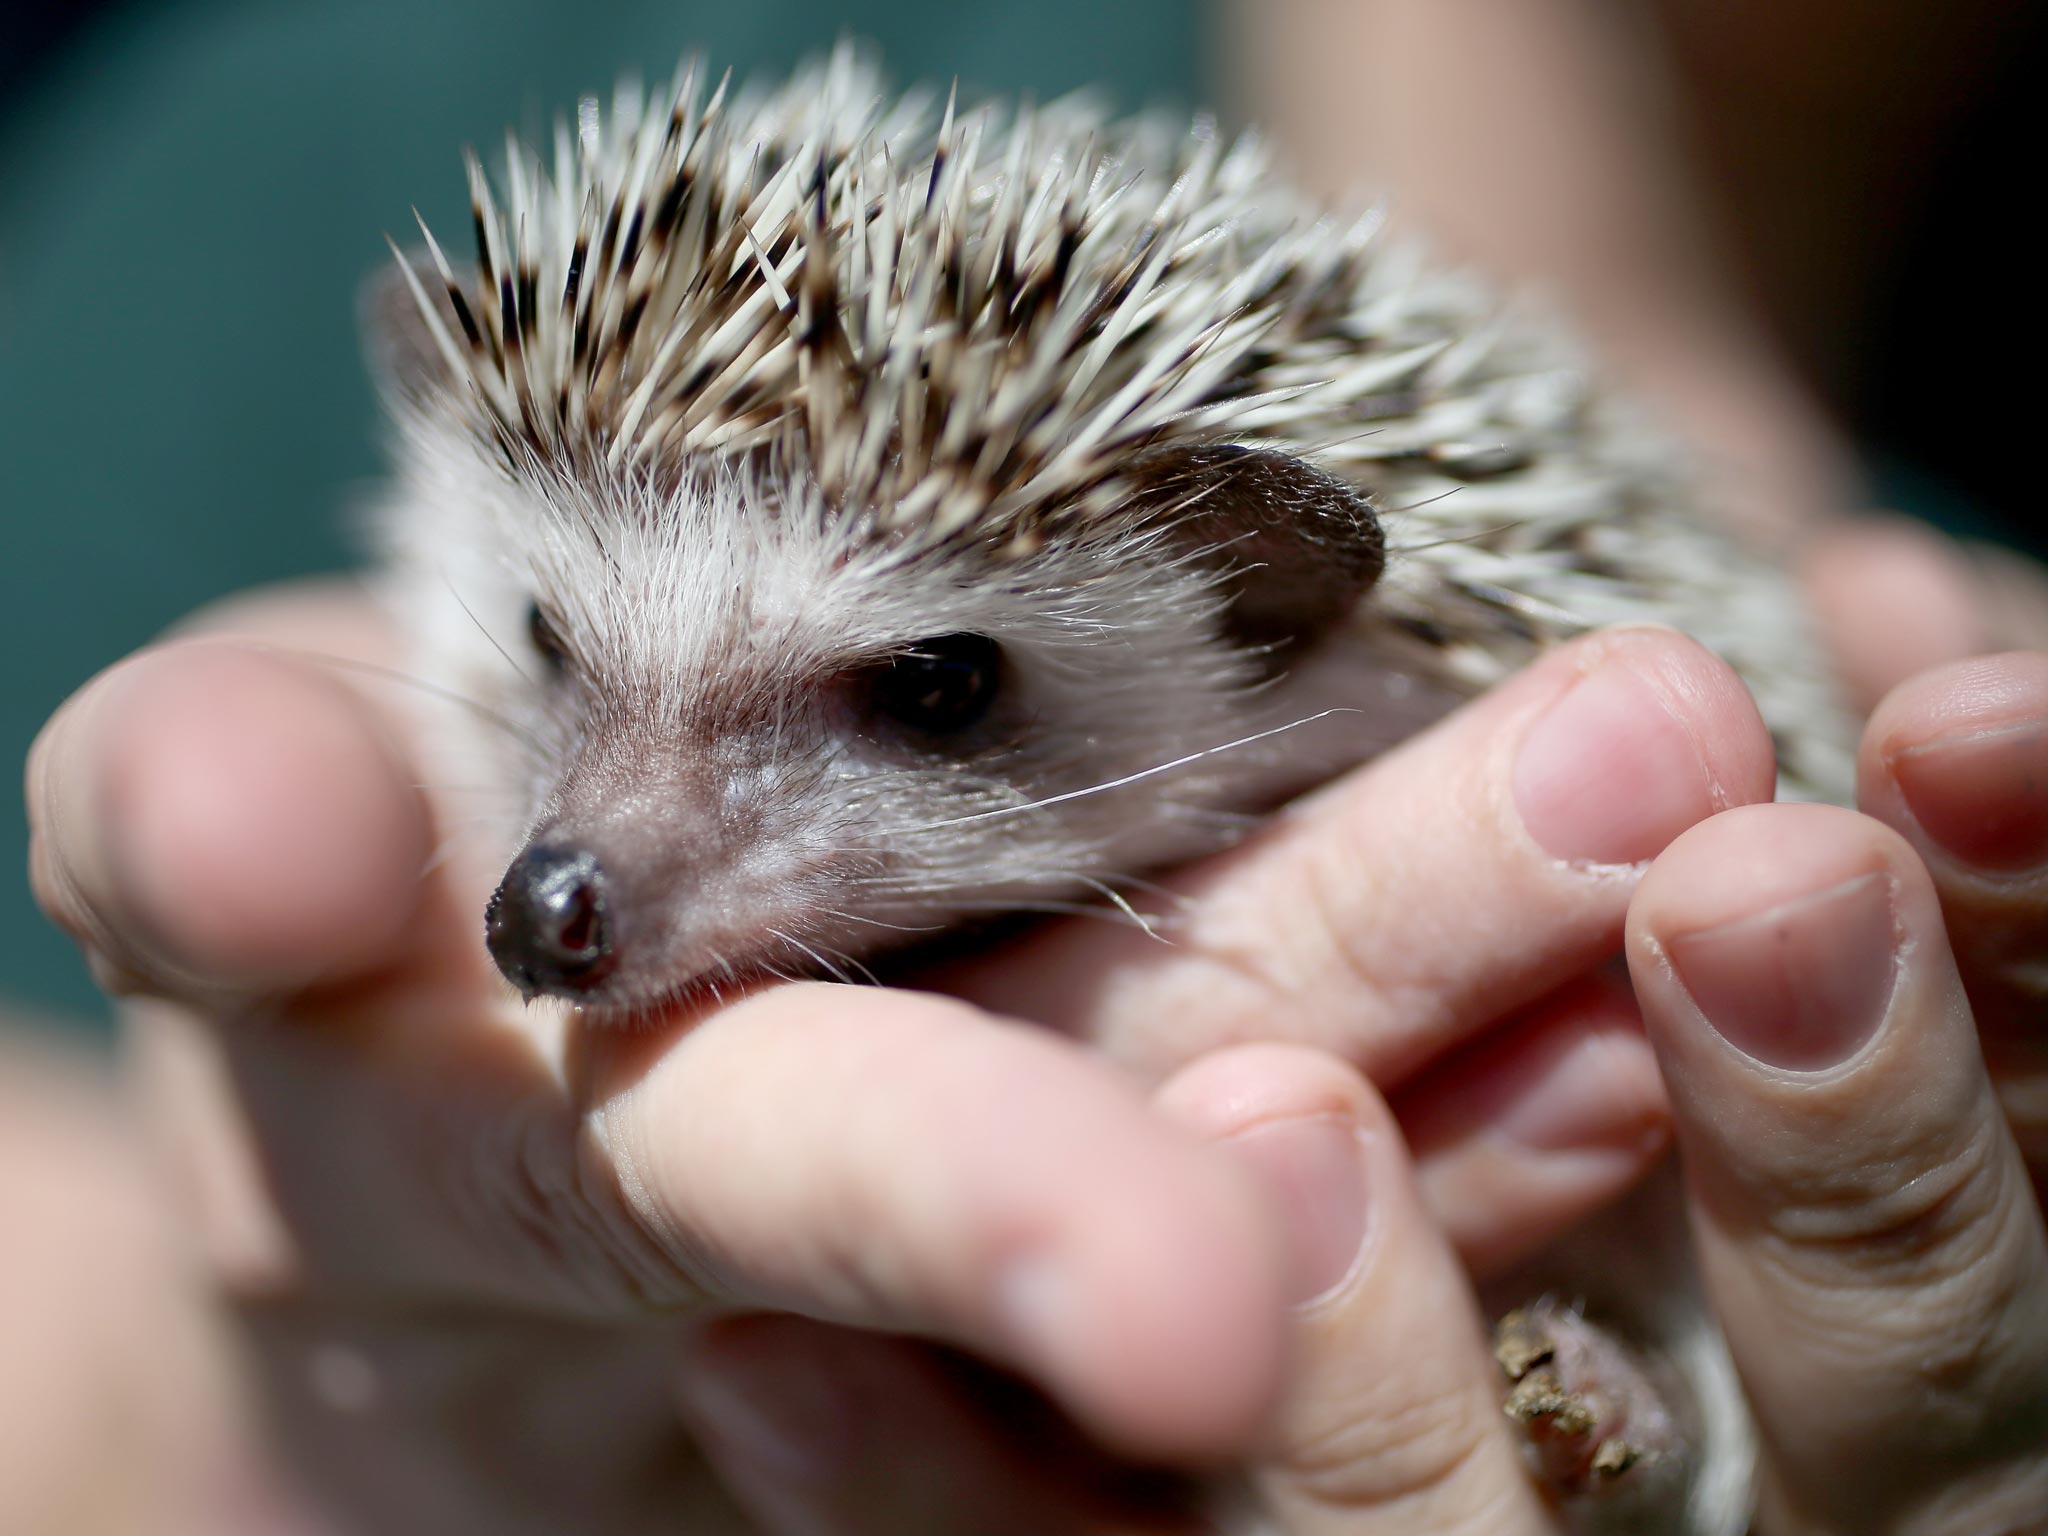 Hedgehogs, badgers, voles and other creatures are under threat